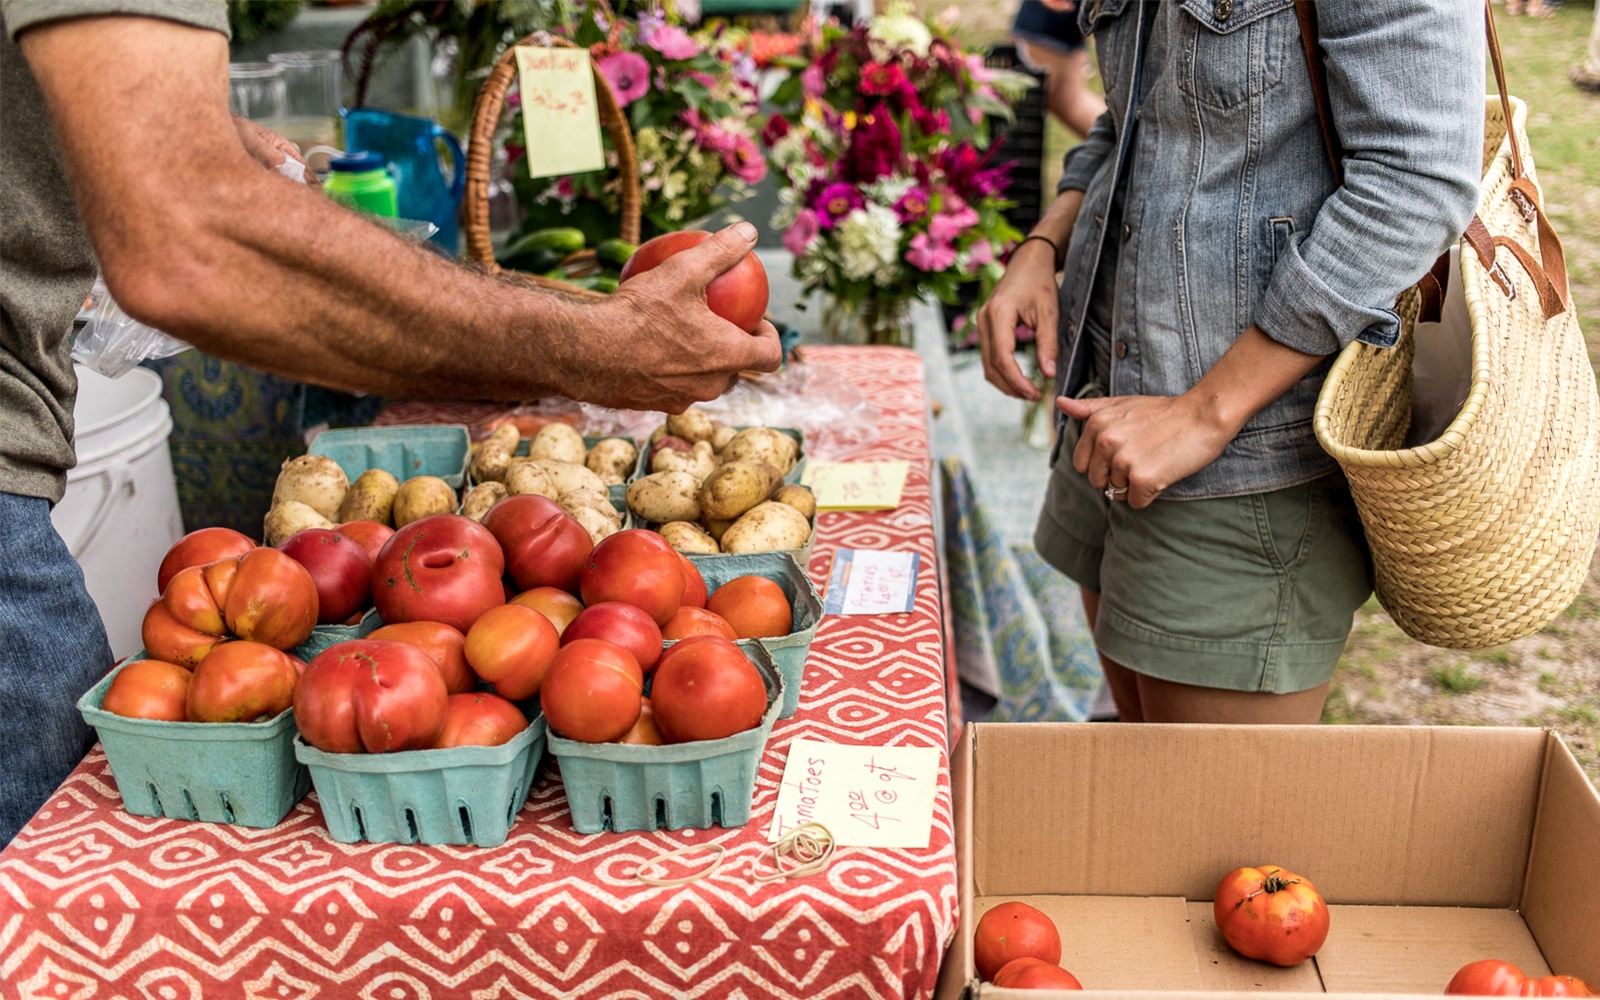 Farmers Market Meal Tips and Recipes